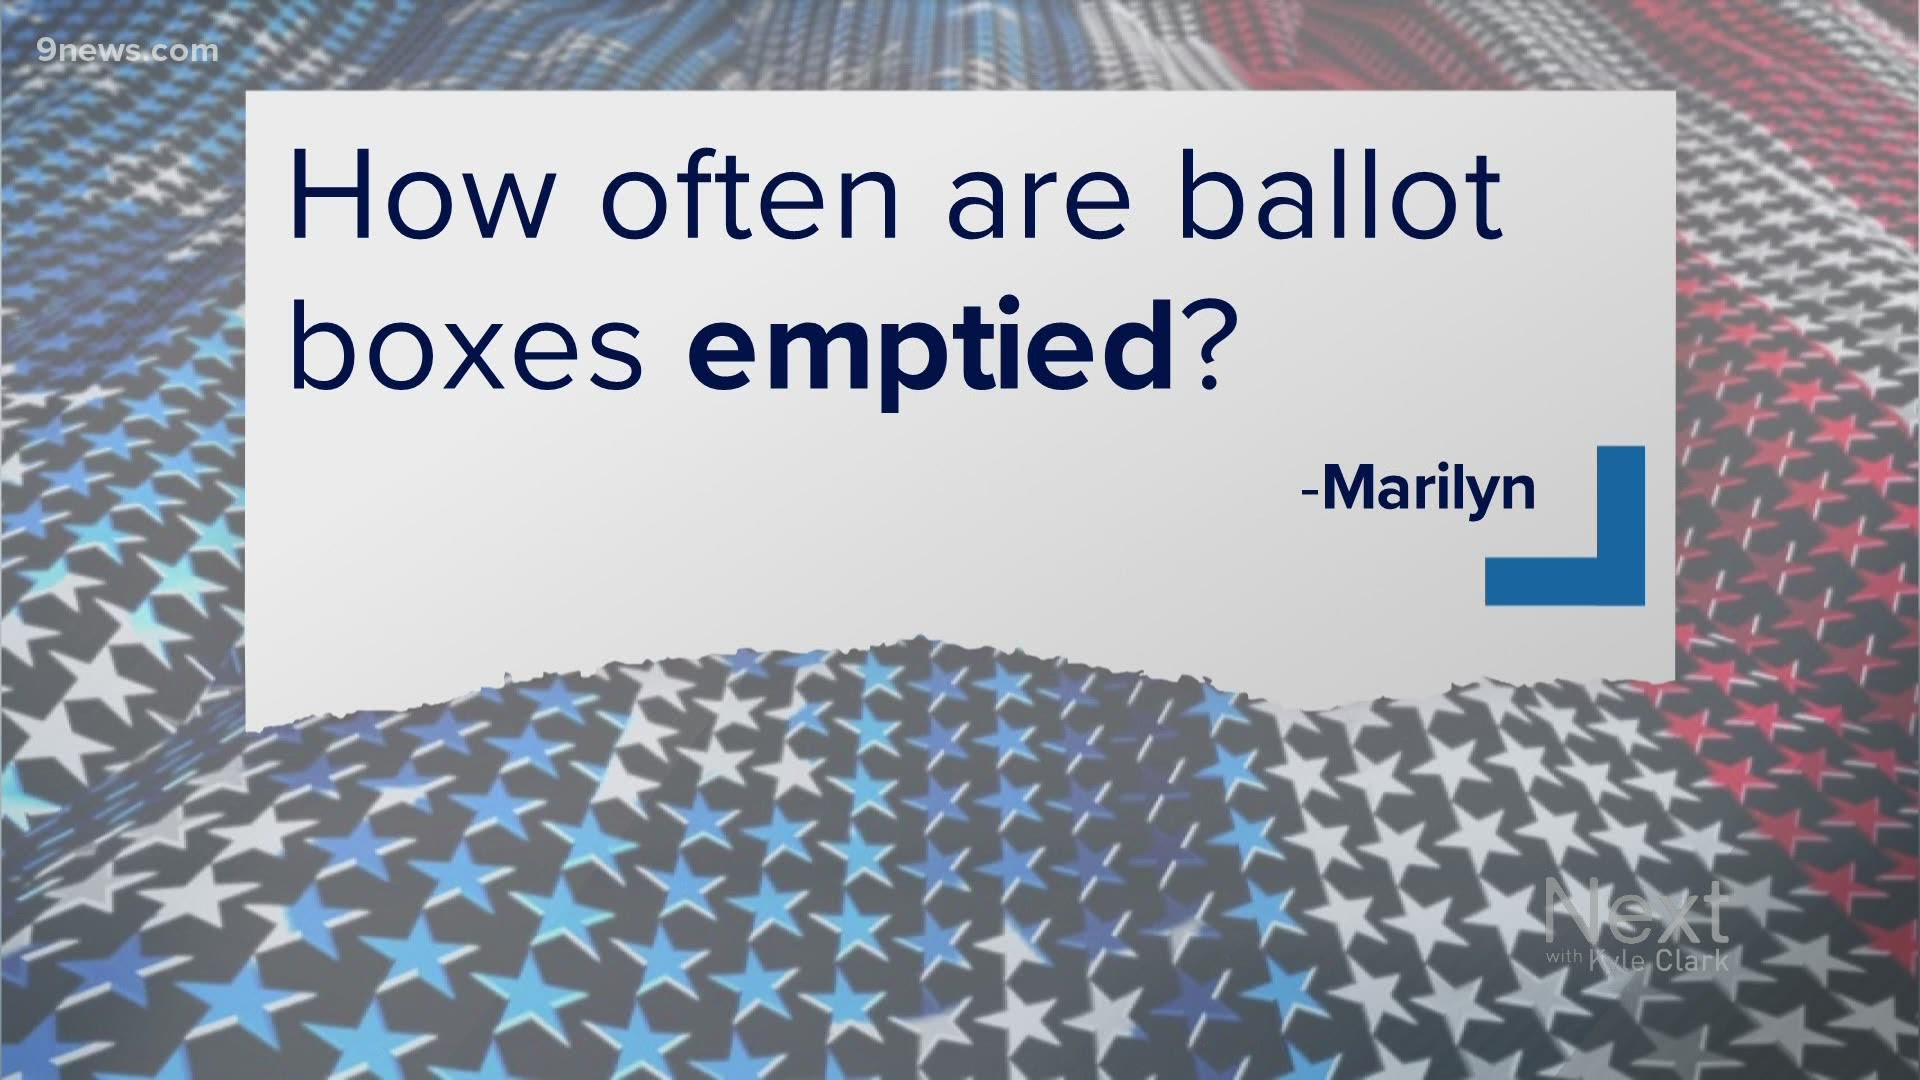 Colorado voters have been sending in their questions about the ballot. Send yours to next@9news.com.